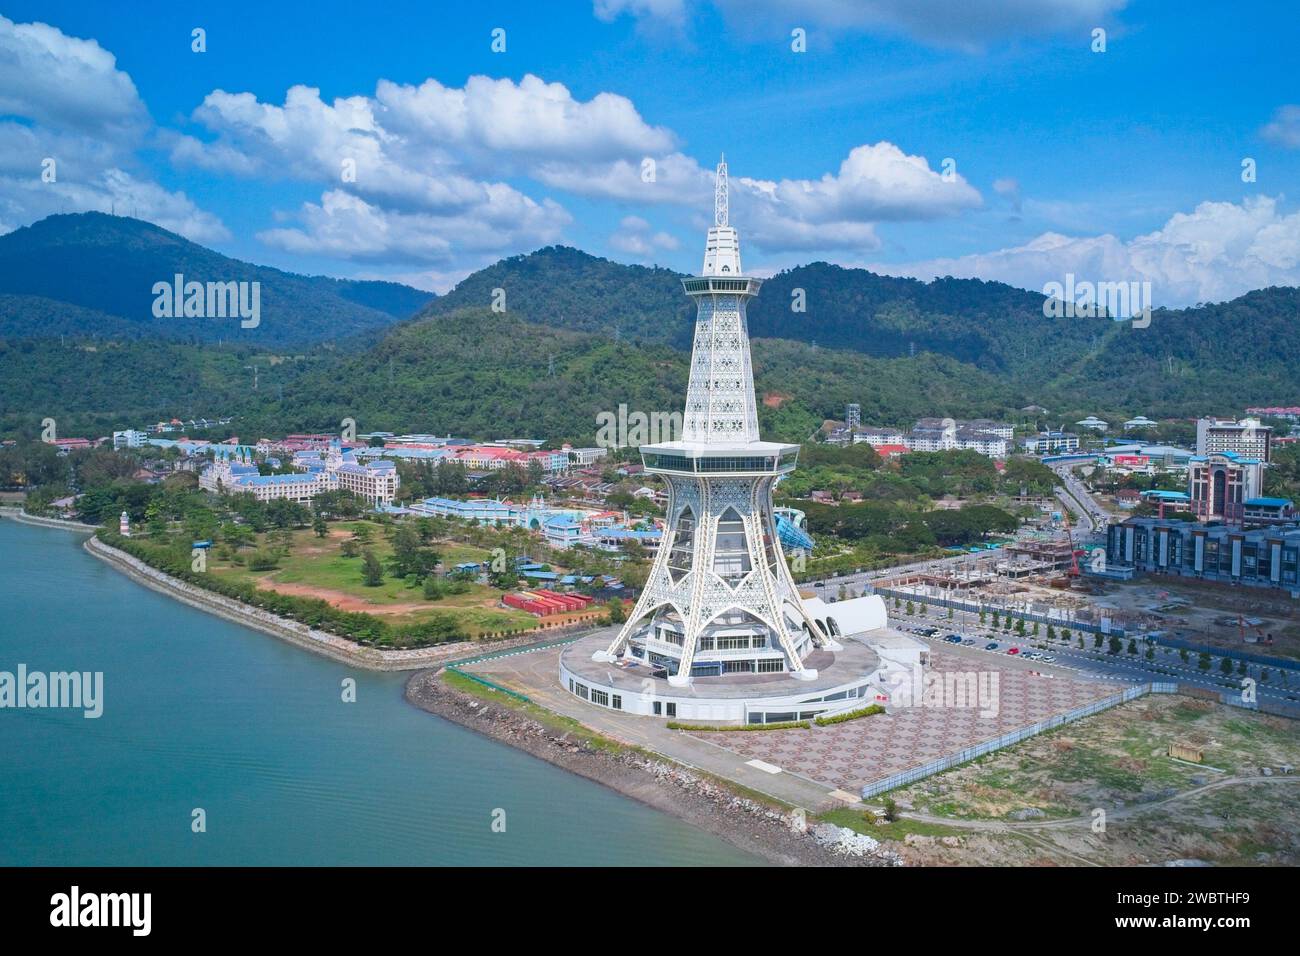 Maha Tower an architectural marvel that stands 138m high in Kuah town brings life with unique attractions and waterfront pleasure. Stock Photo